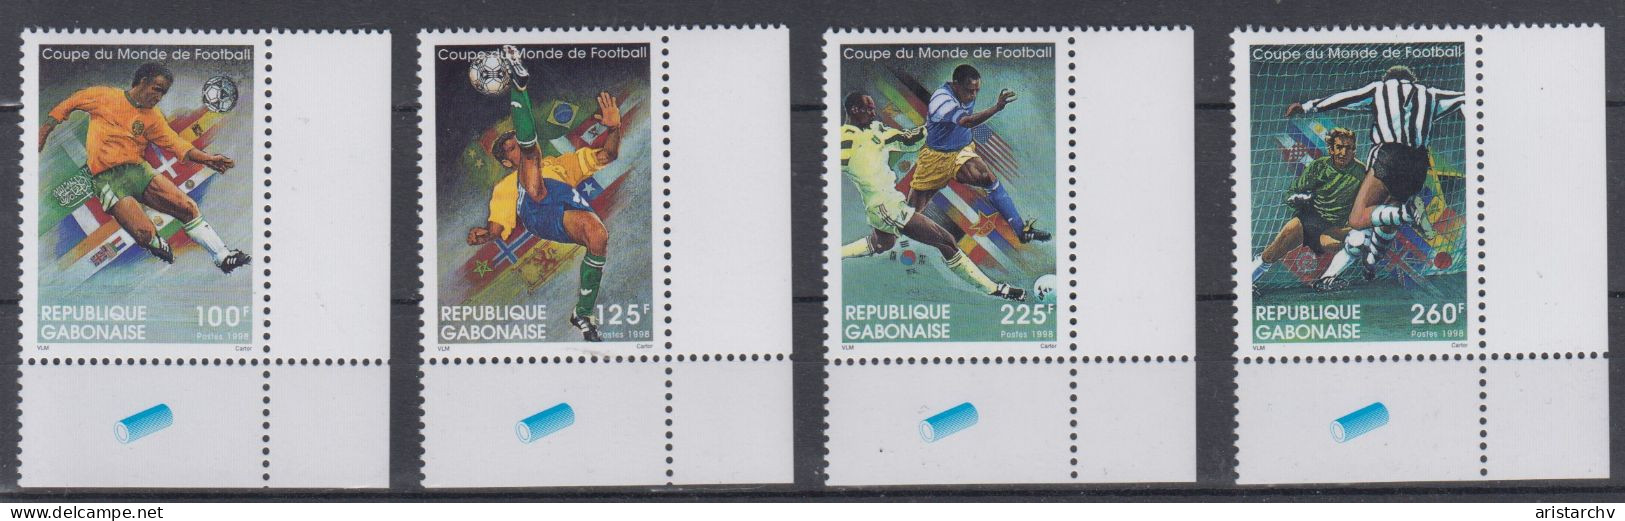 GABON 1998 FOOTBALL WORLD CUP S/SHEET AND 4 STAMPS - 1998 – Francia